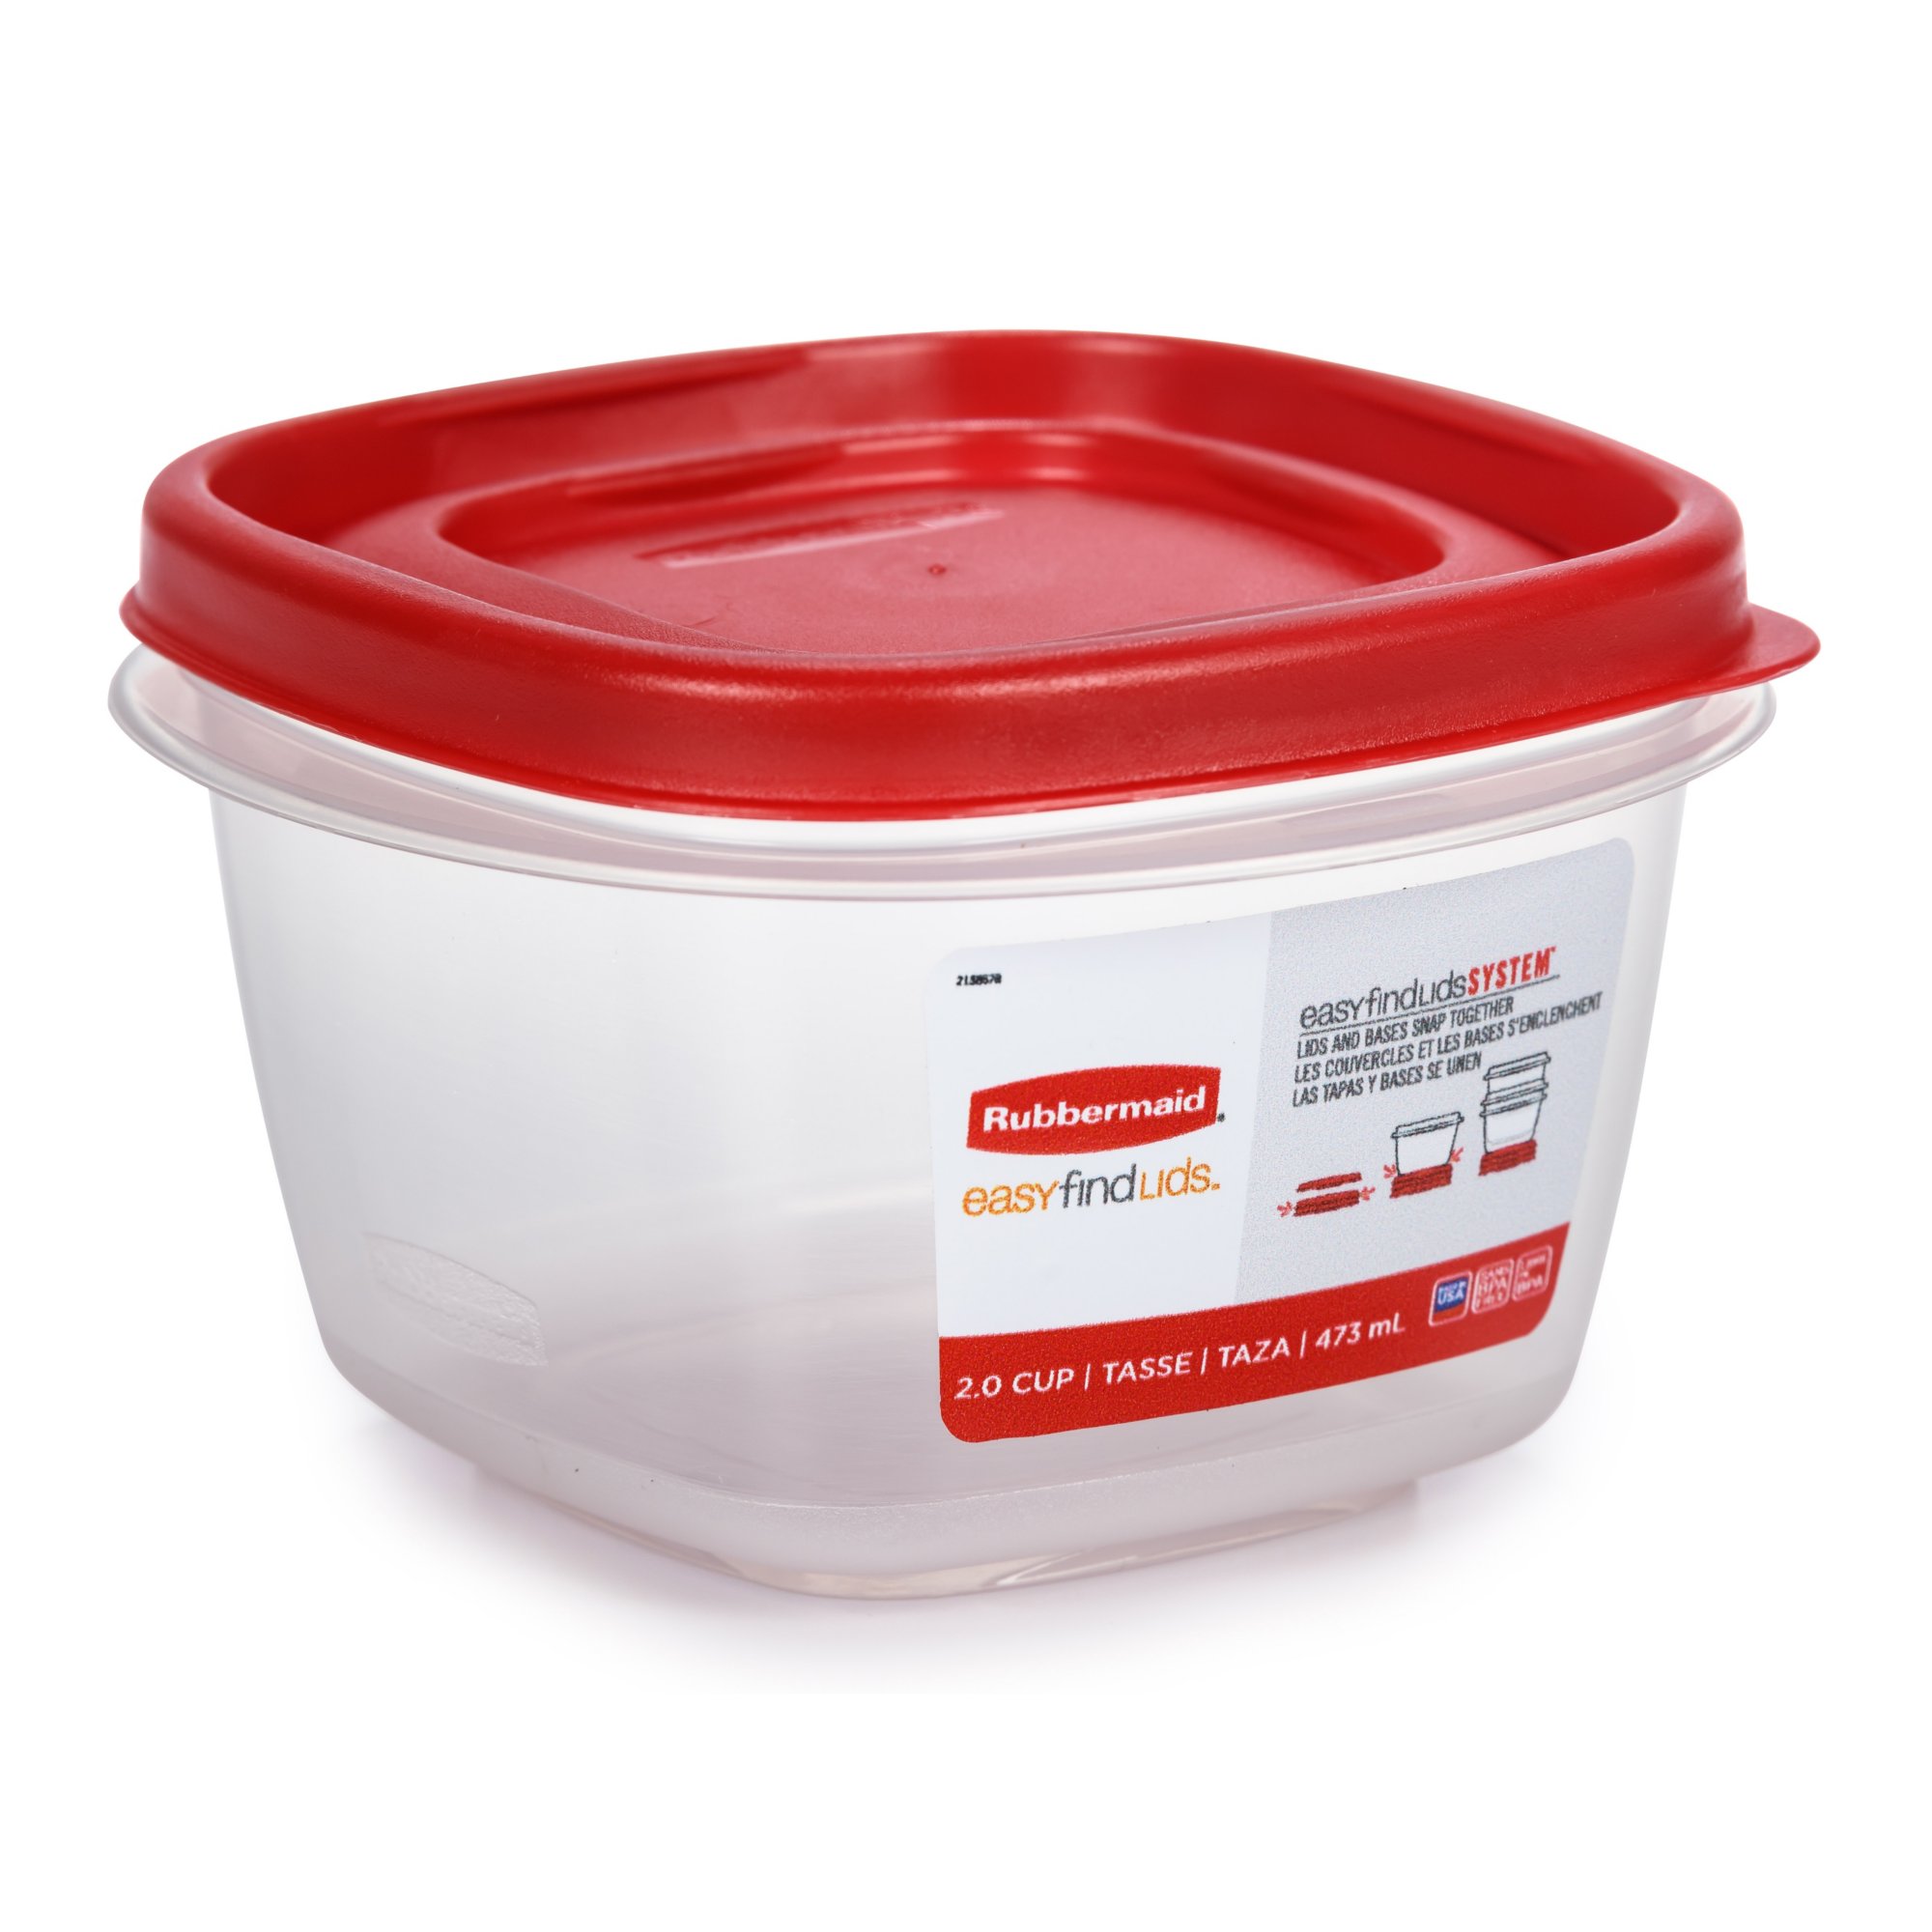 Rubbermaid Easy Find Lid 7-Cup Food Storage Container, Red